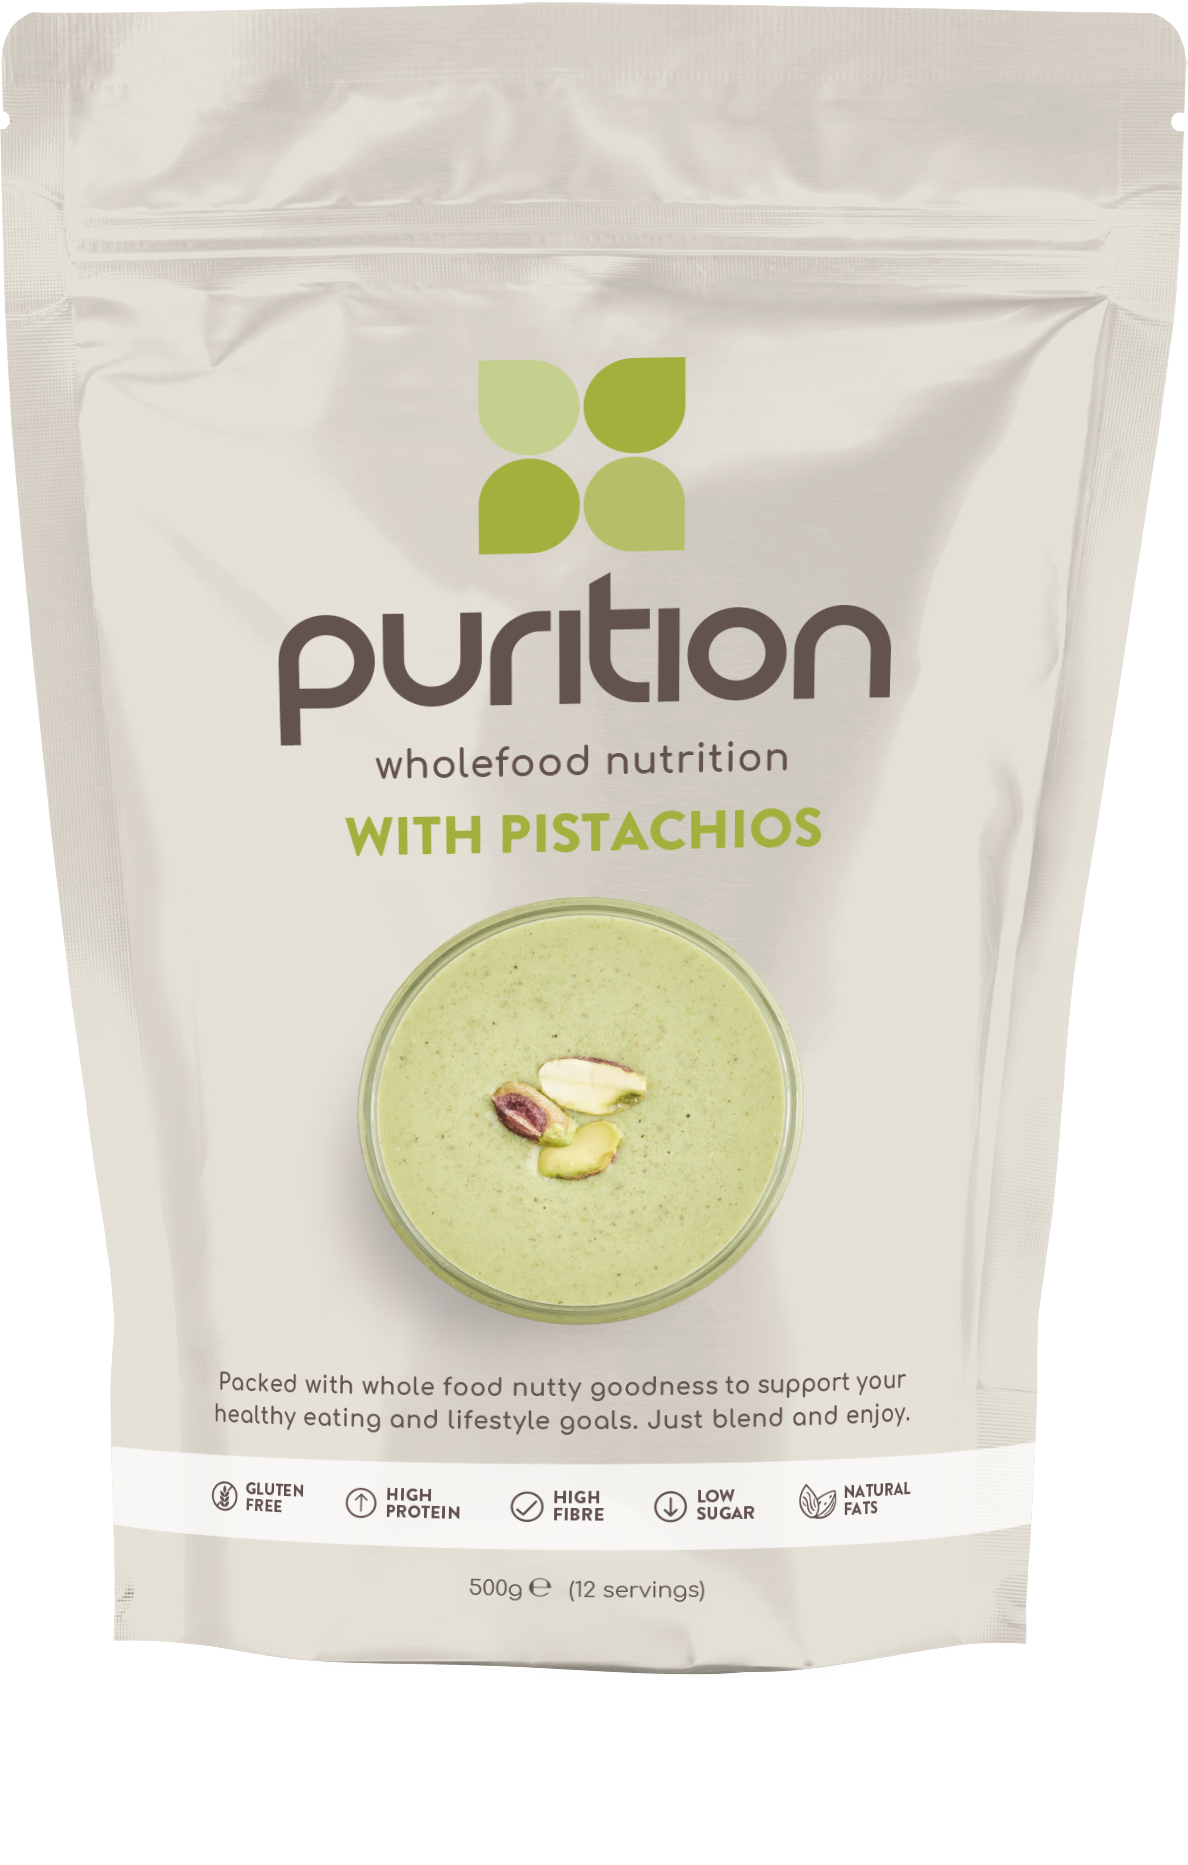 Purition Wholefood Nutrition With Pistachios 500g